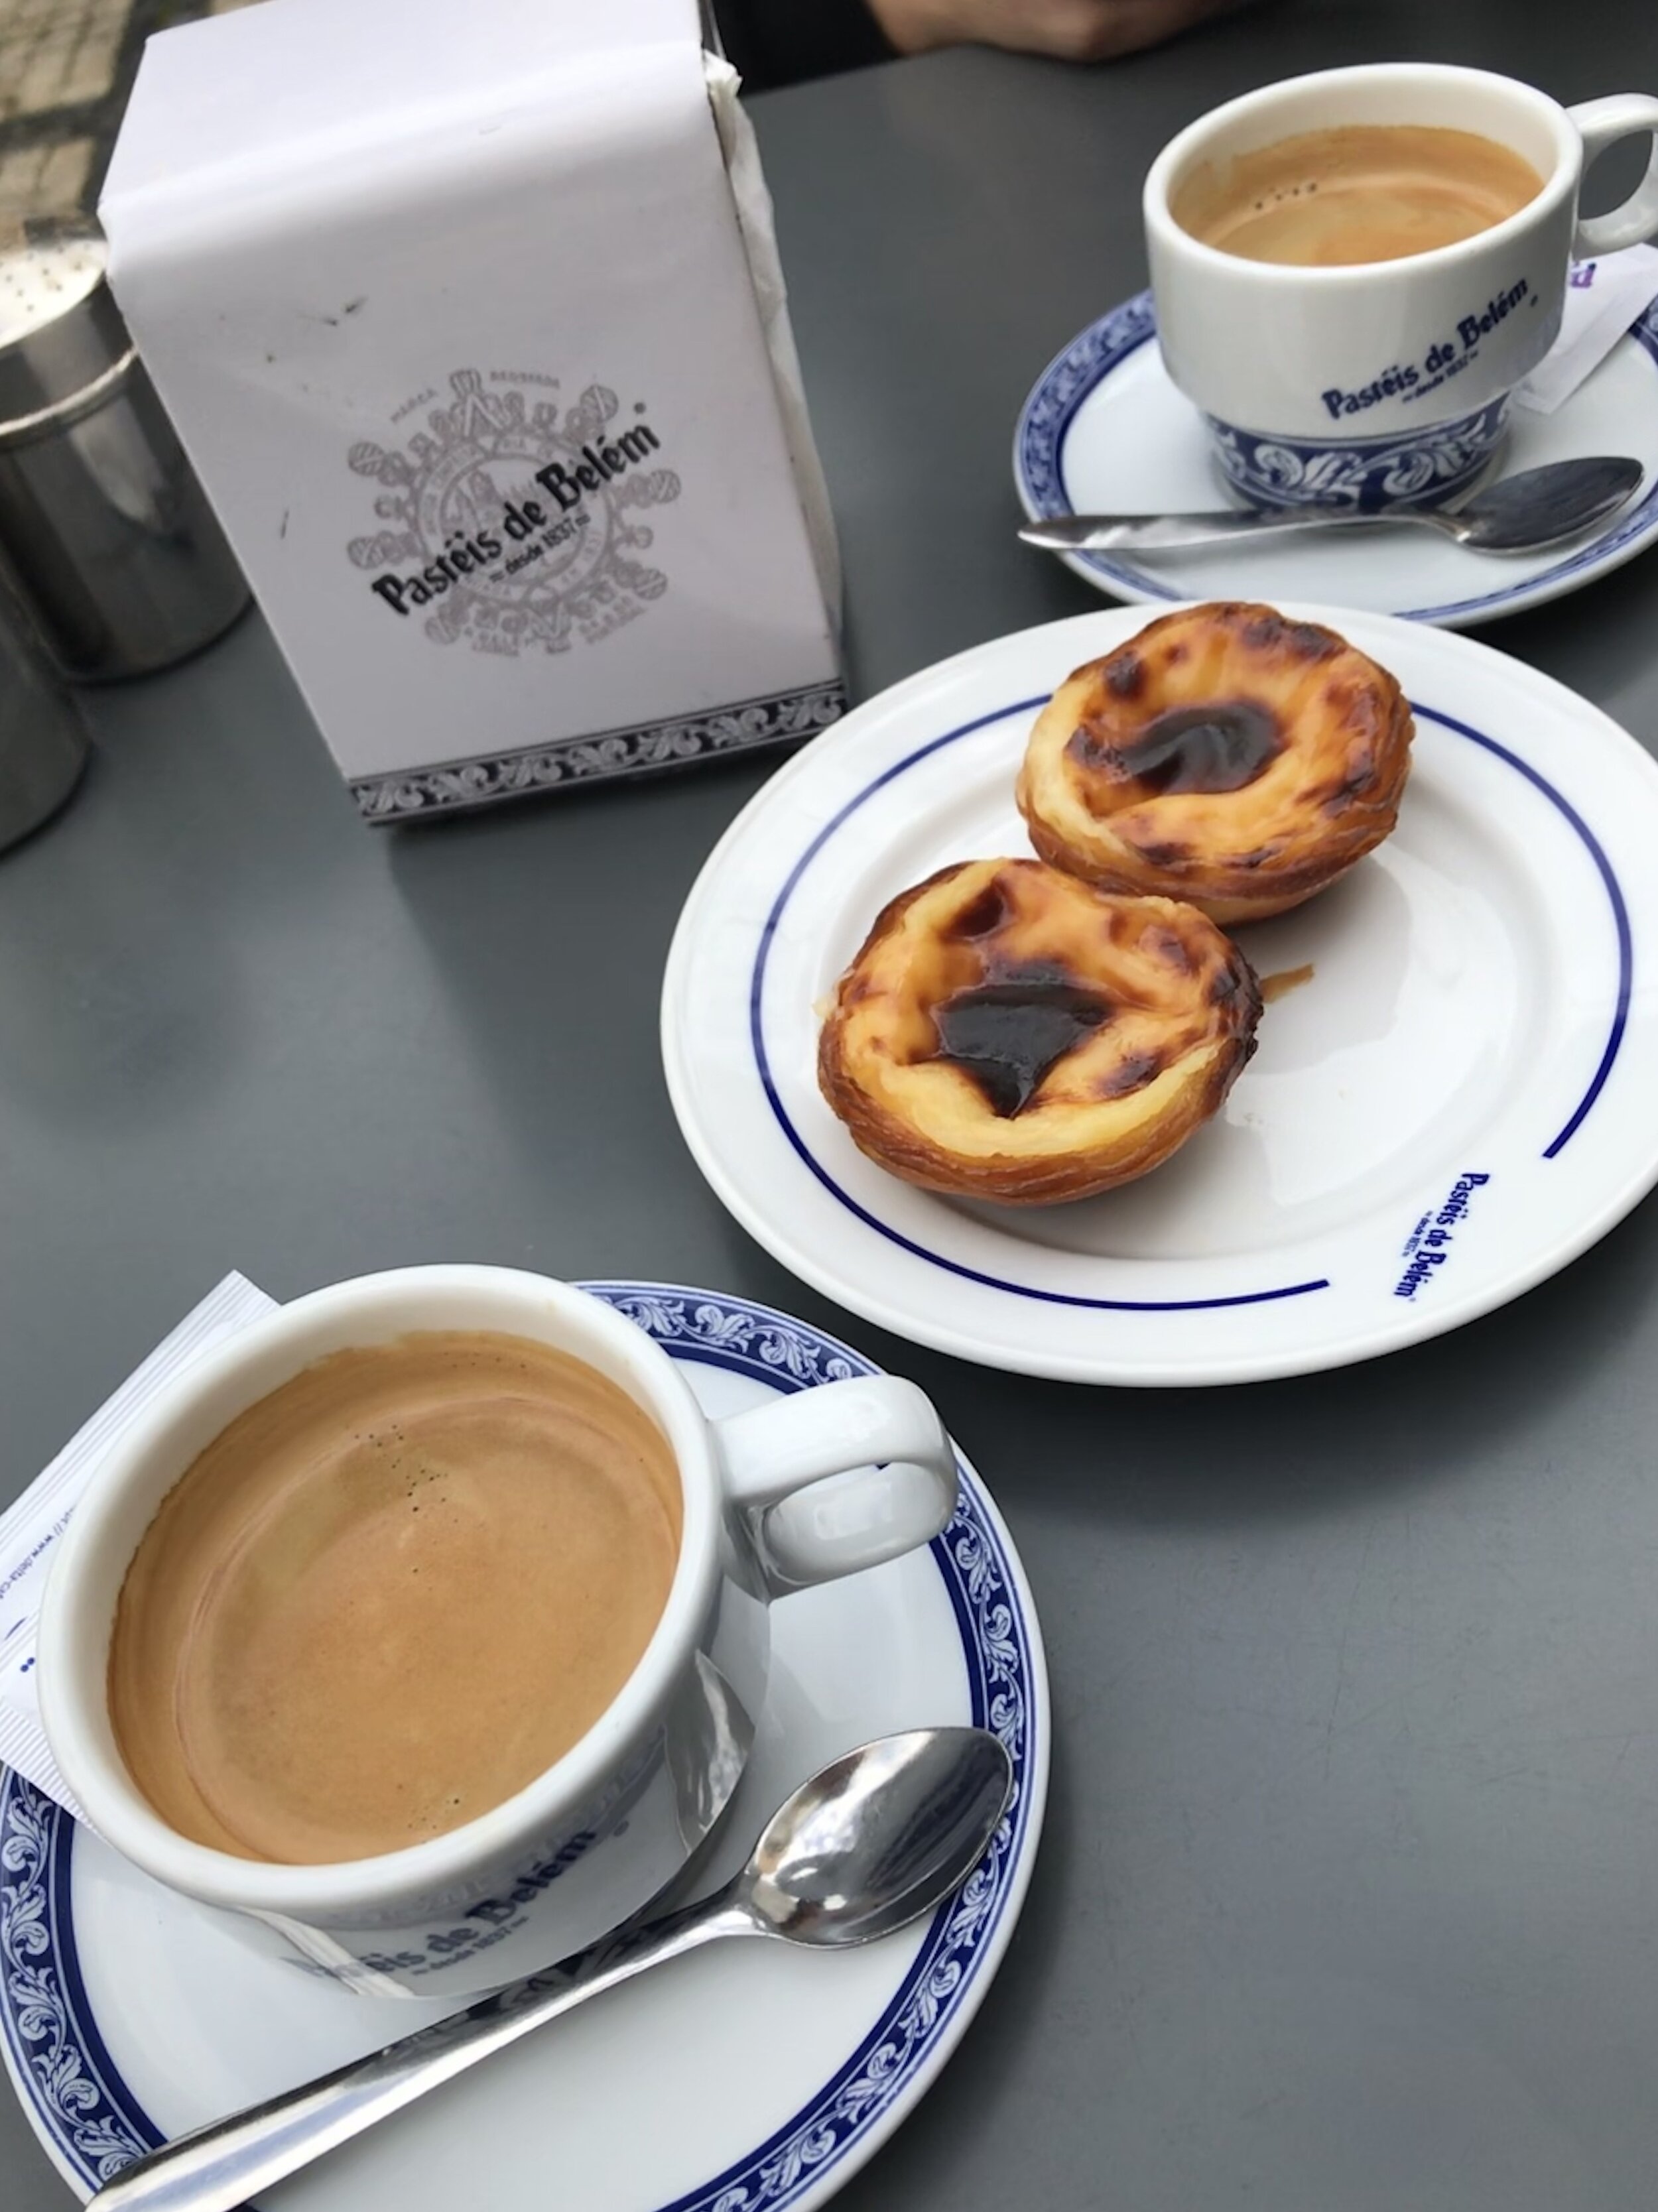 Pasteis de Nata are one of the lesser known traditional desserts in Europe, but that is one of the things that makes them so good. Absolutely amazing. 